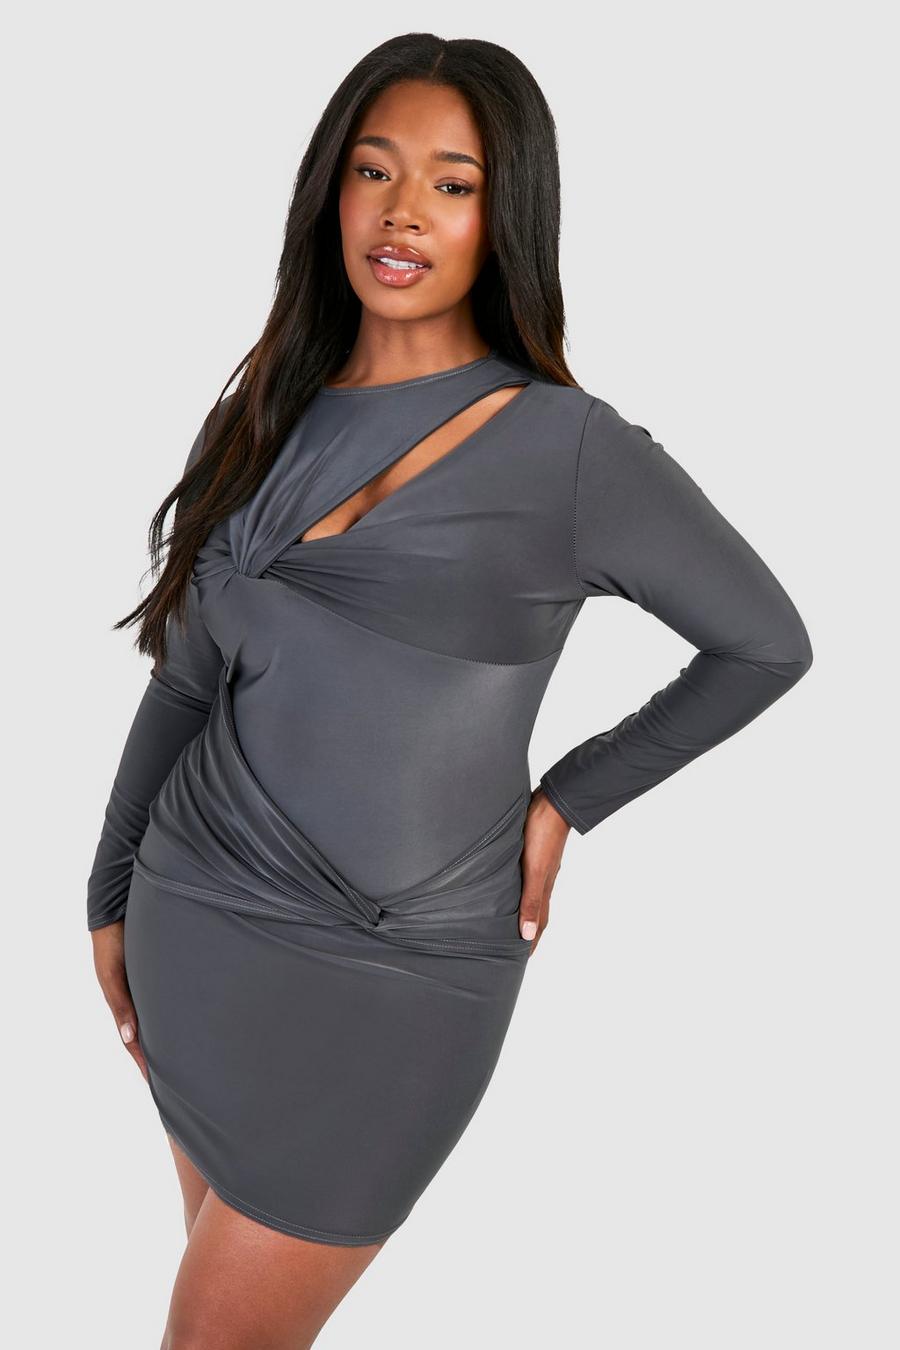 Grande taille - Robe courte soyeuse à manches longues, Charcoal